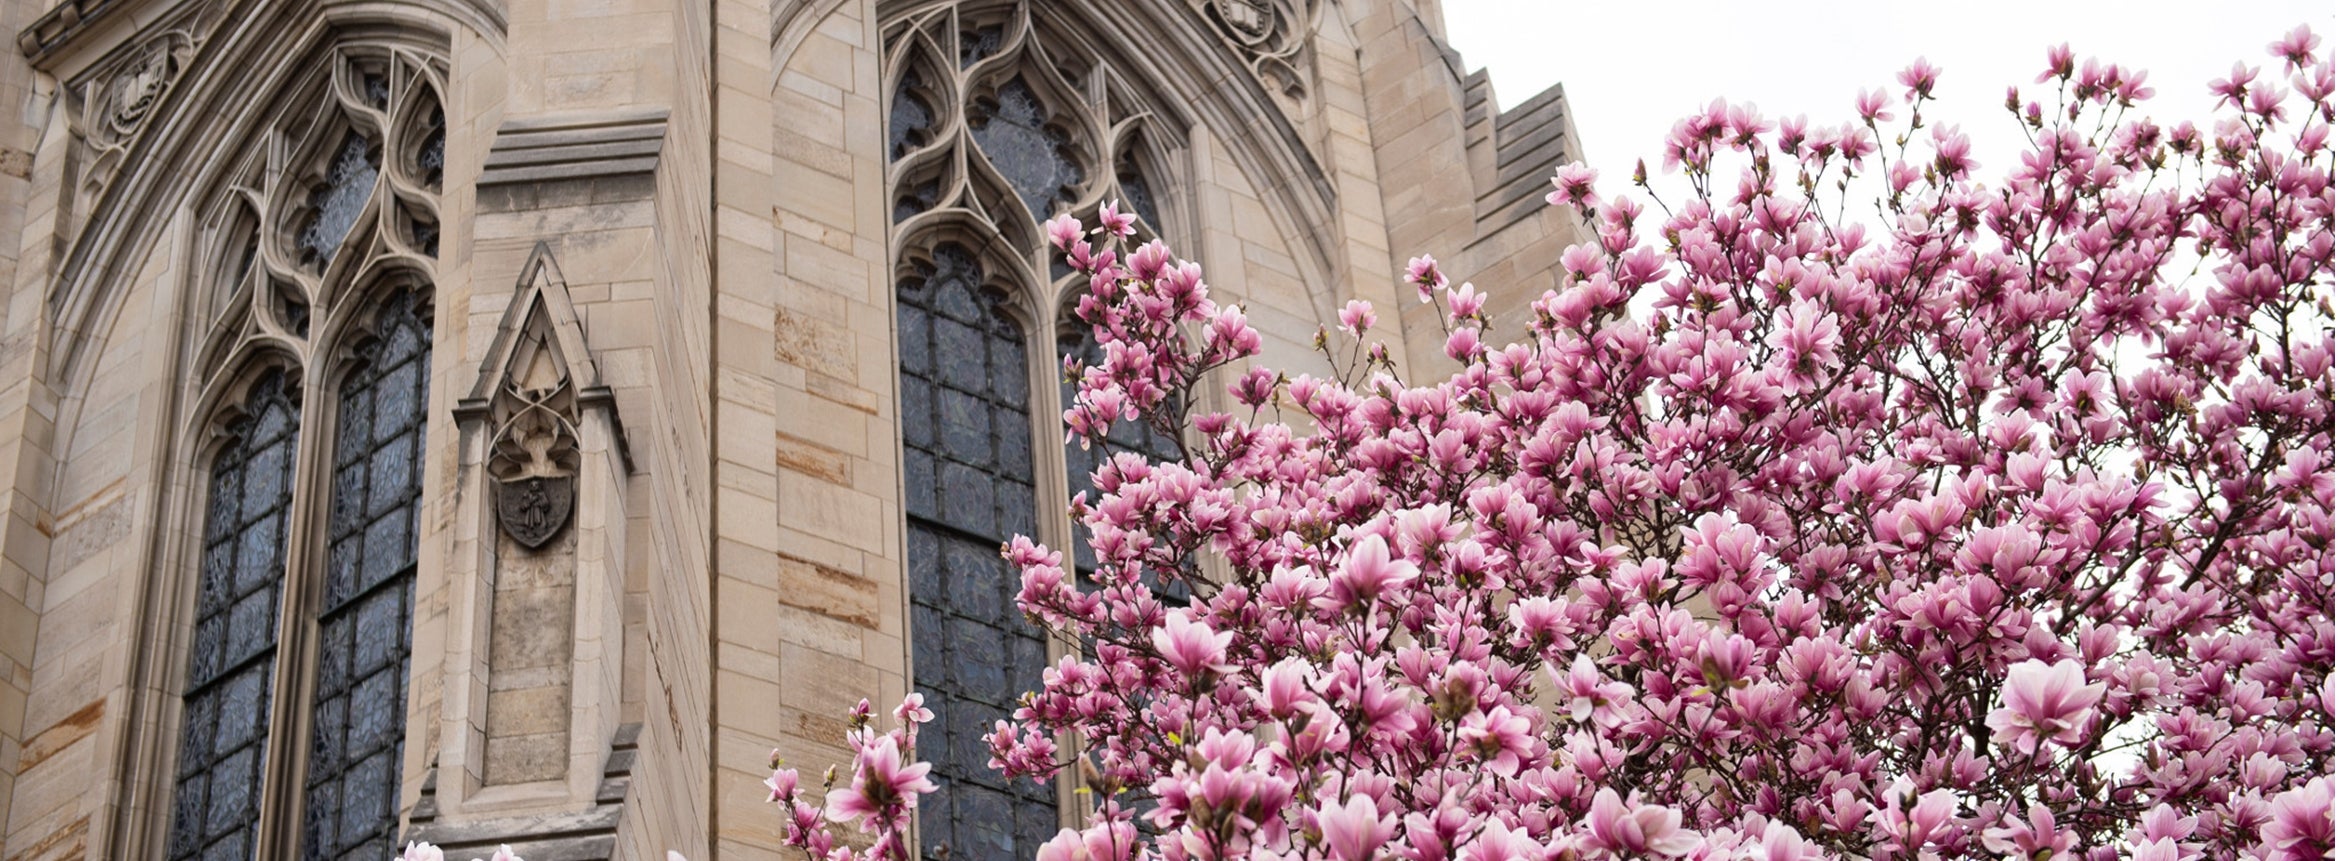 A view of the Cathedral of Learning in the spring.